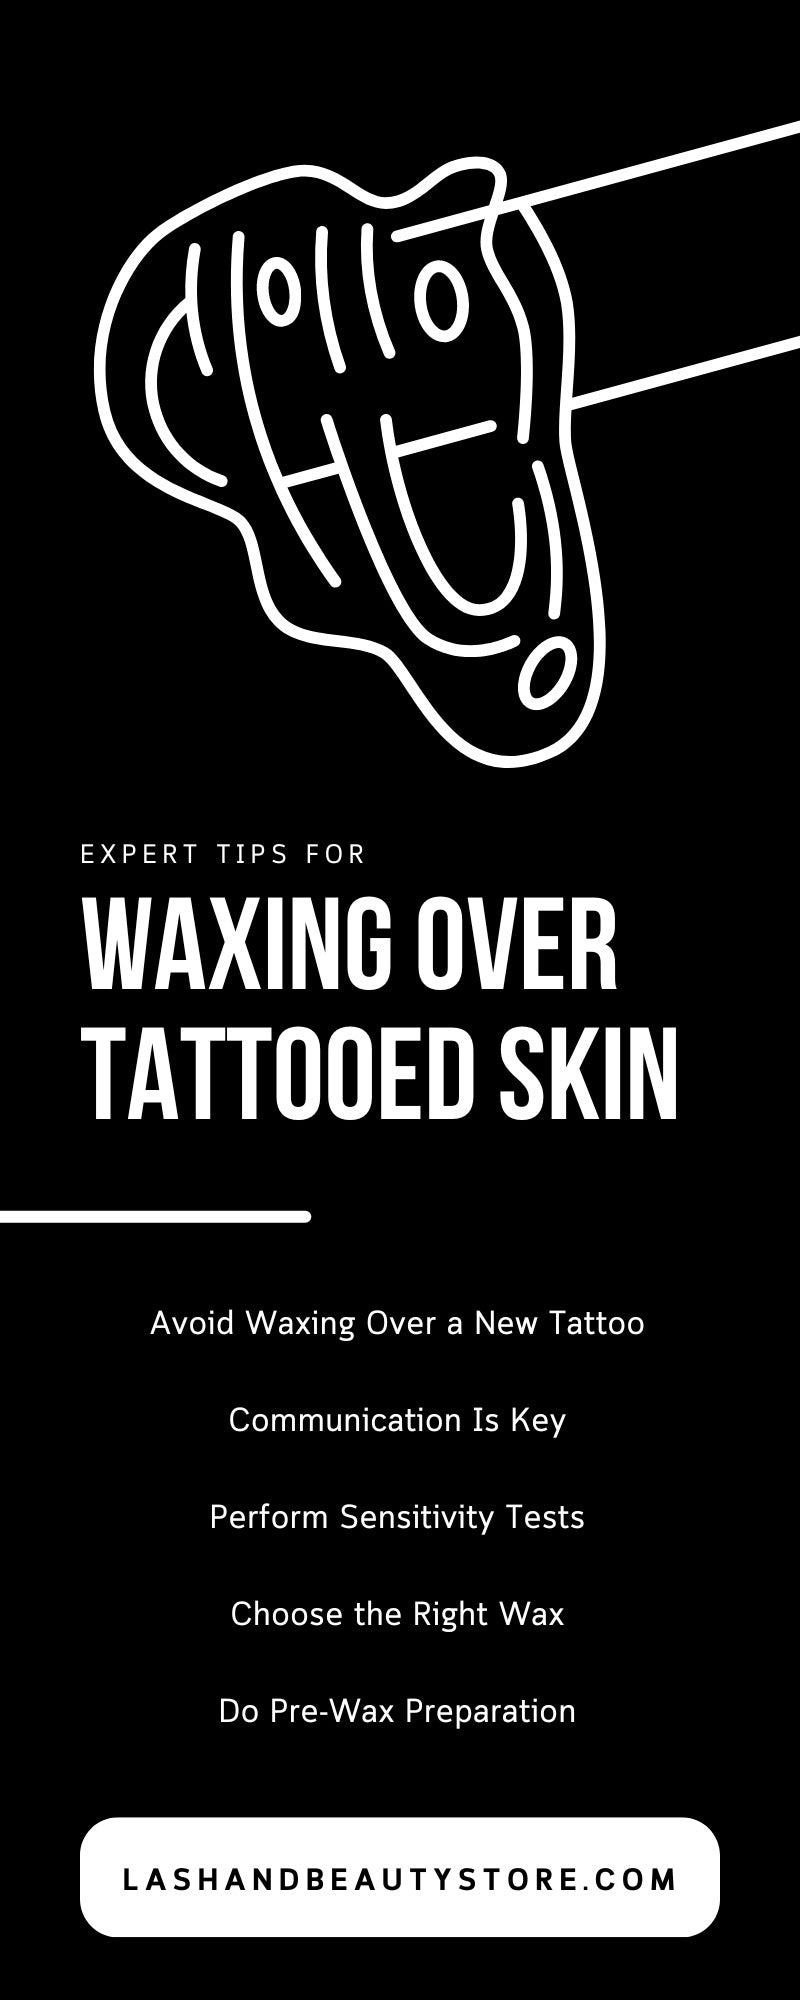 10 Expert Tips for Waxing Over Tattooed Skin